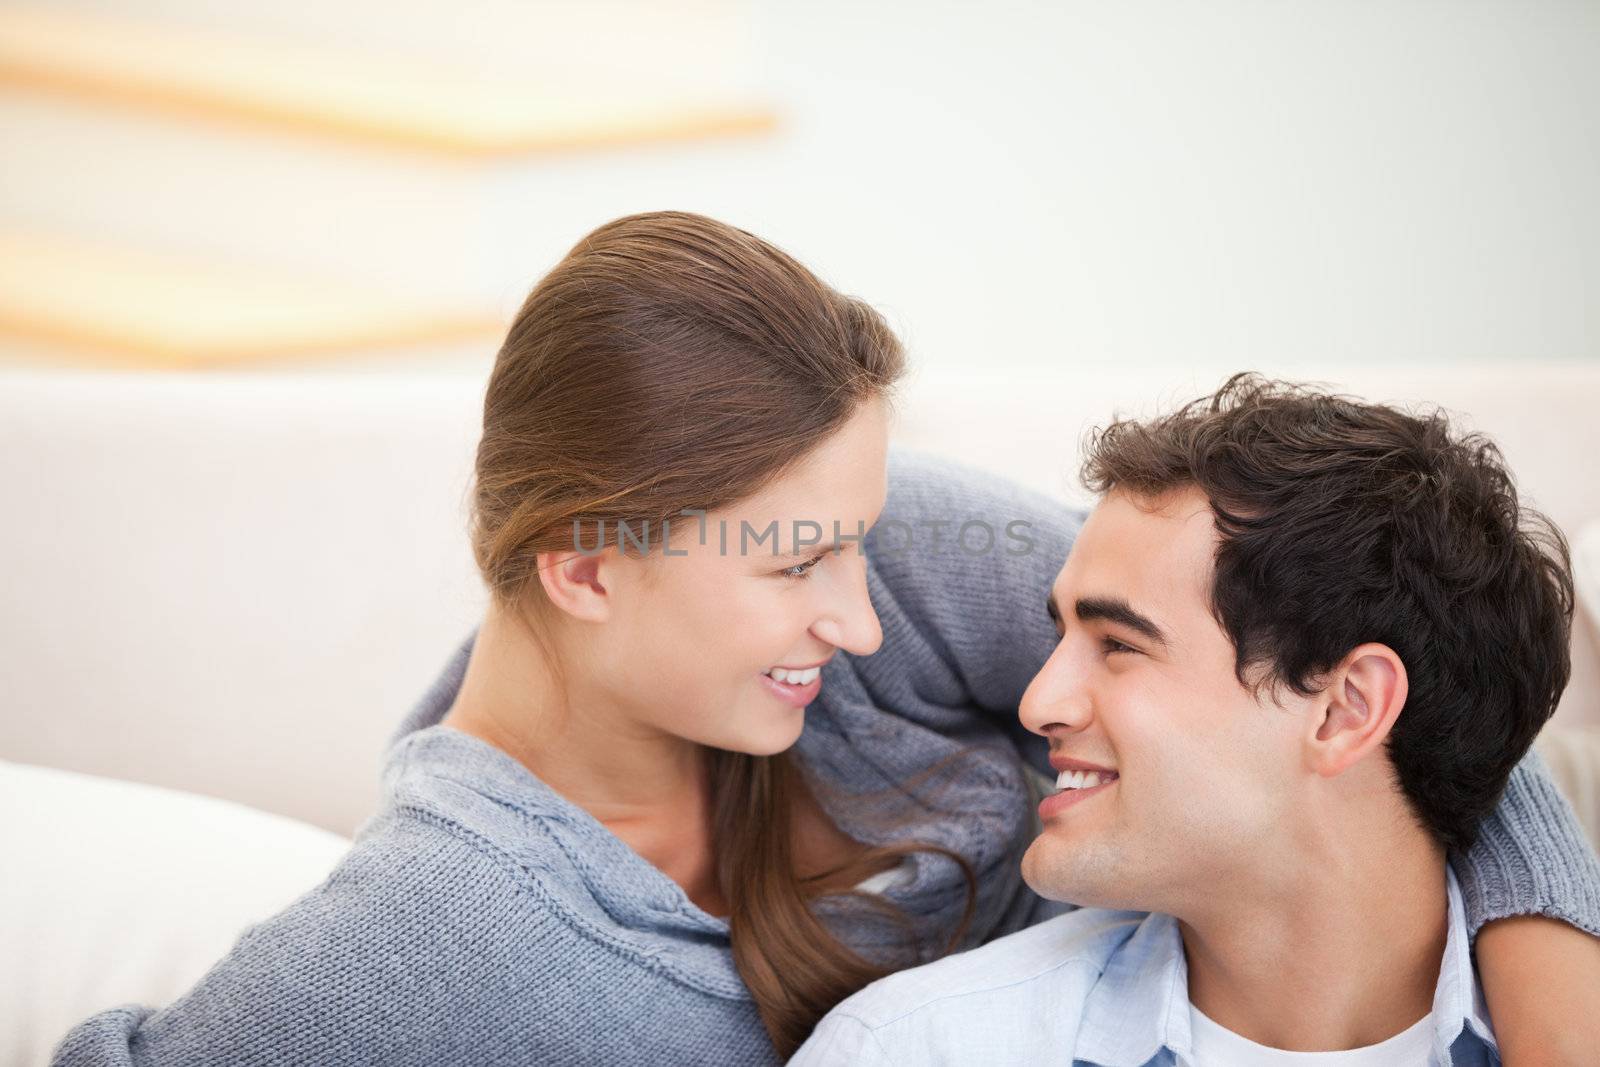 Couple looking each other while embracing by Wavebreakmedia